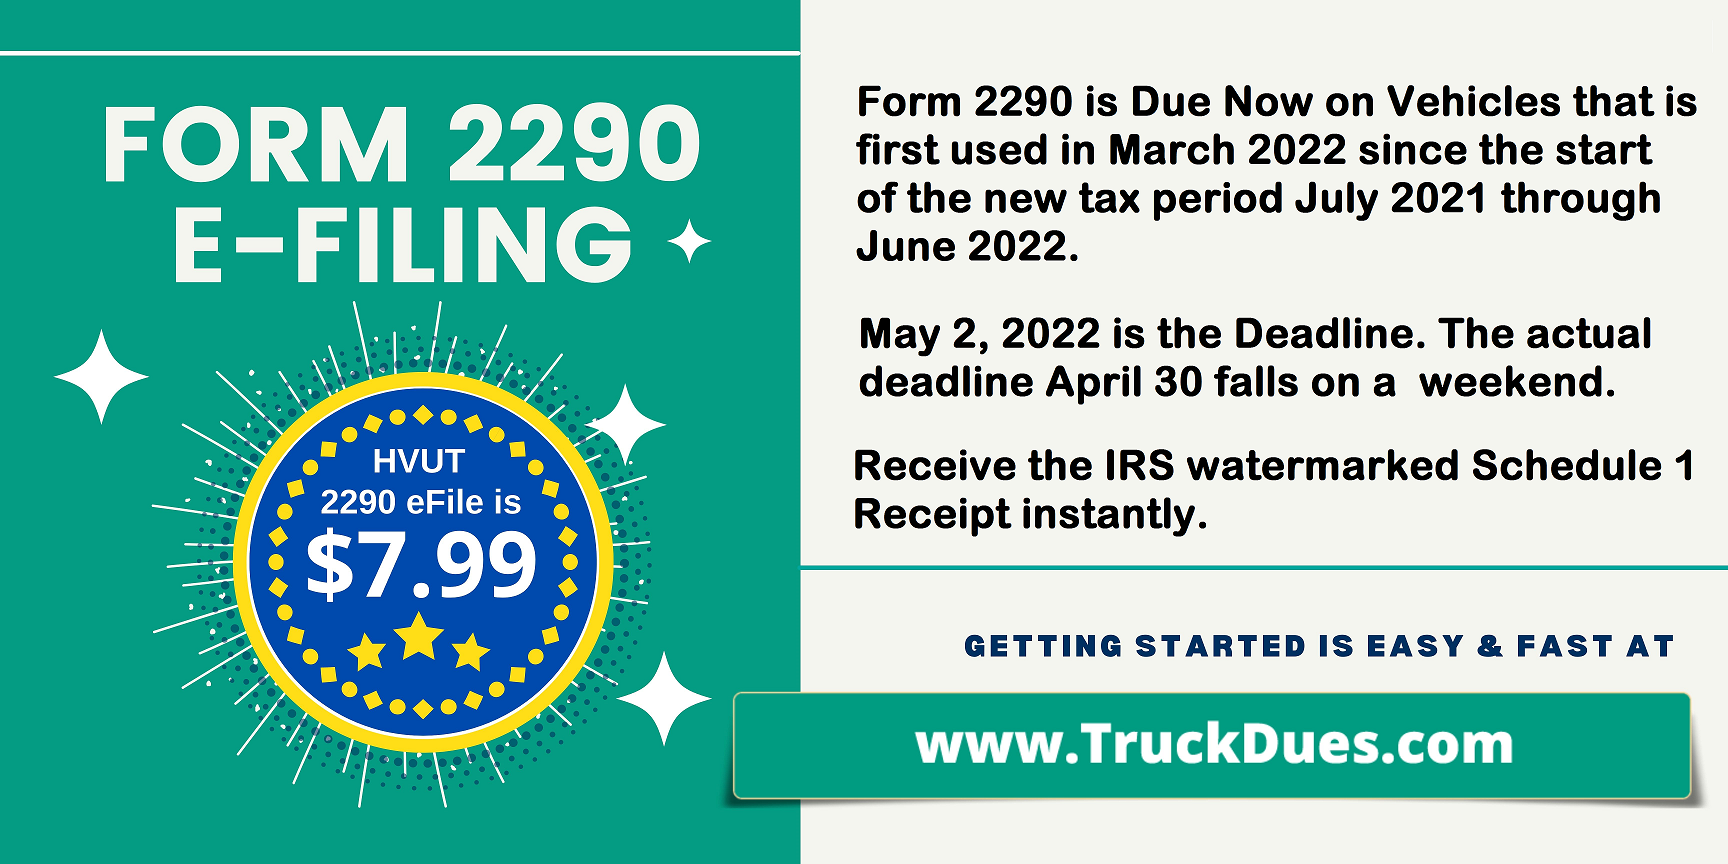 fastest 2290 efile - May 2 Deadline for March 2022